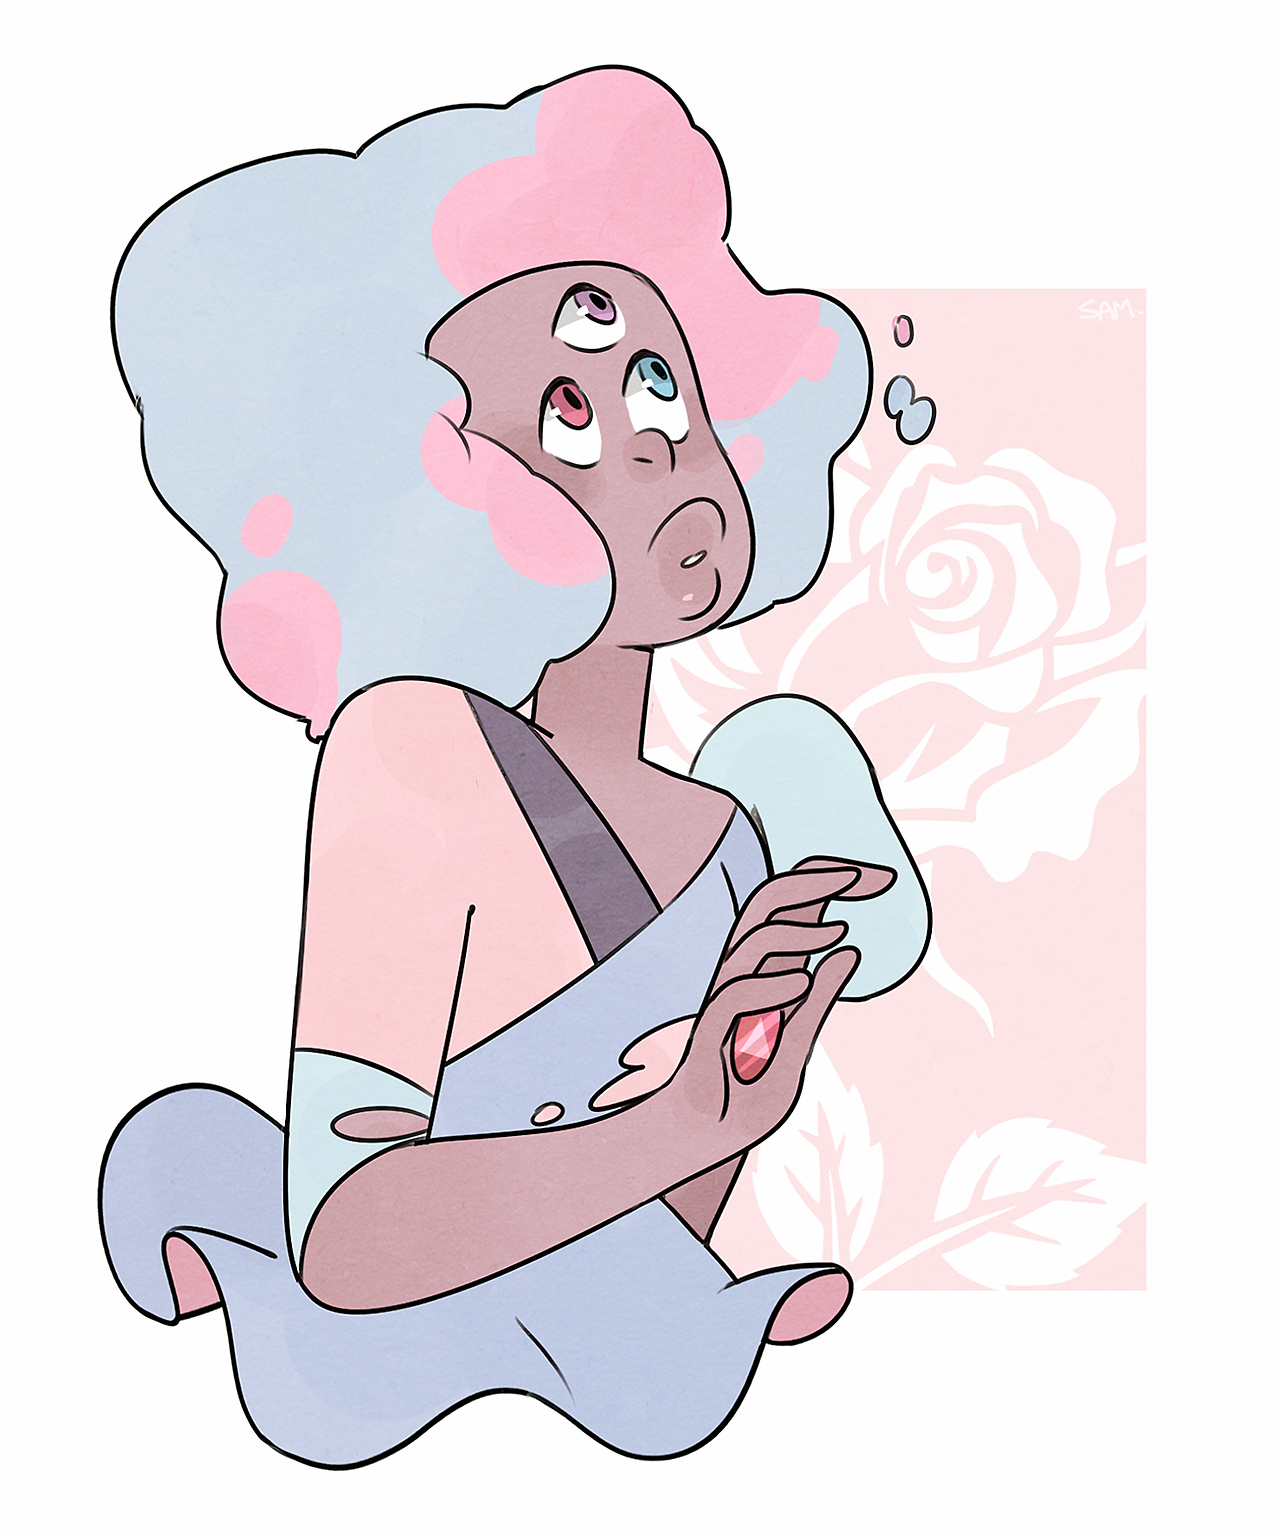 So, here just a repost of Cotton Candy Garnet from my last post